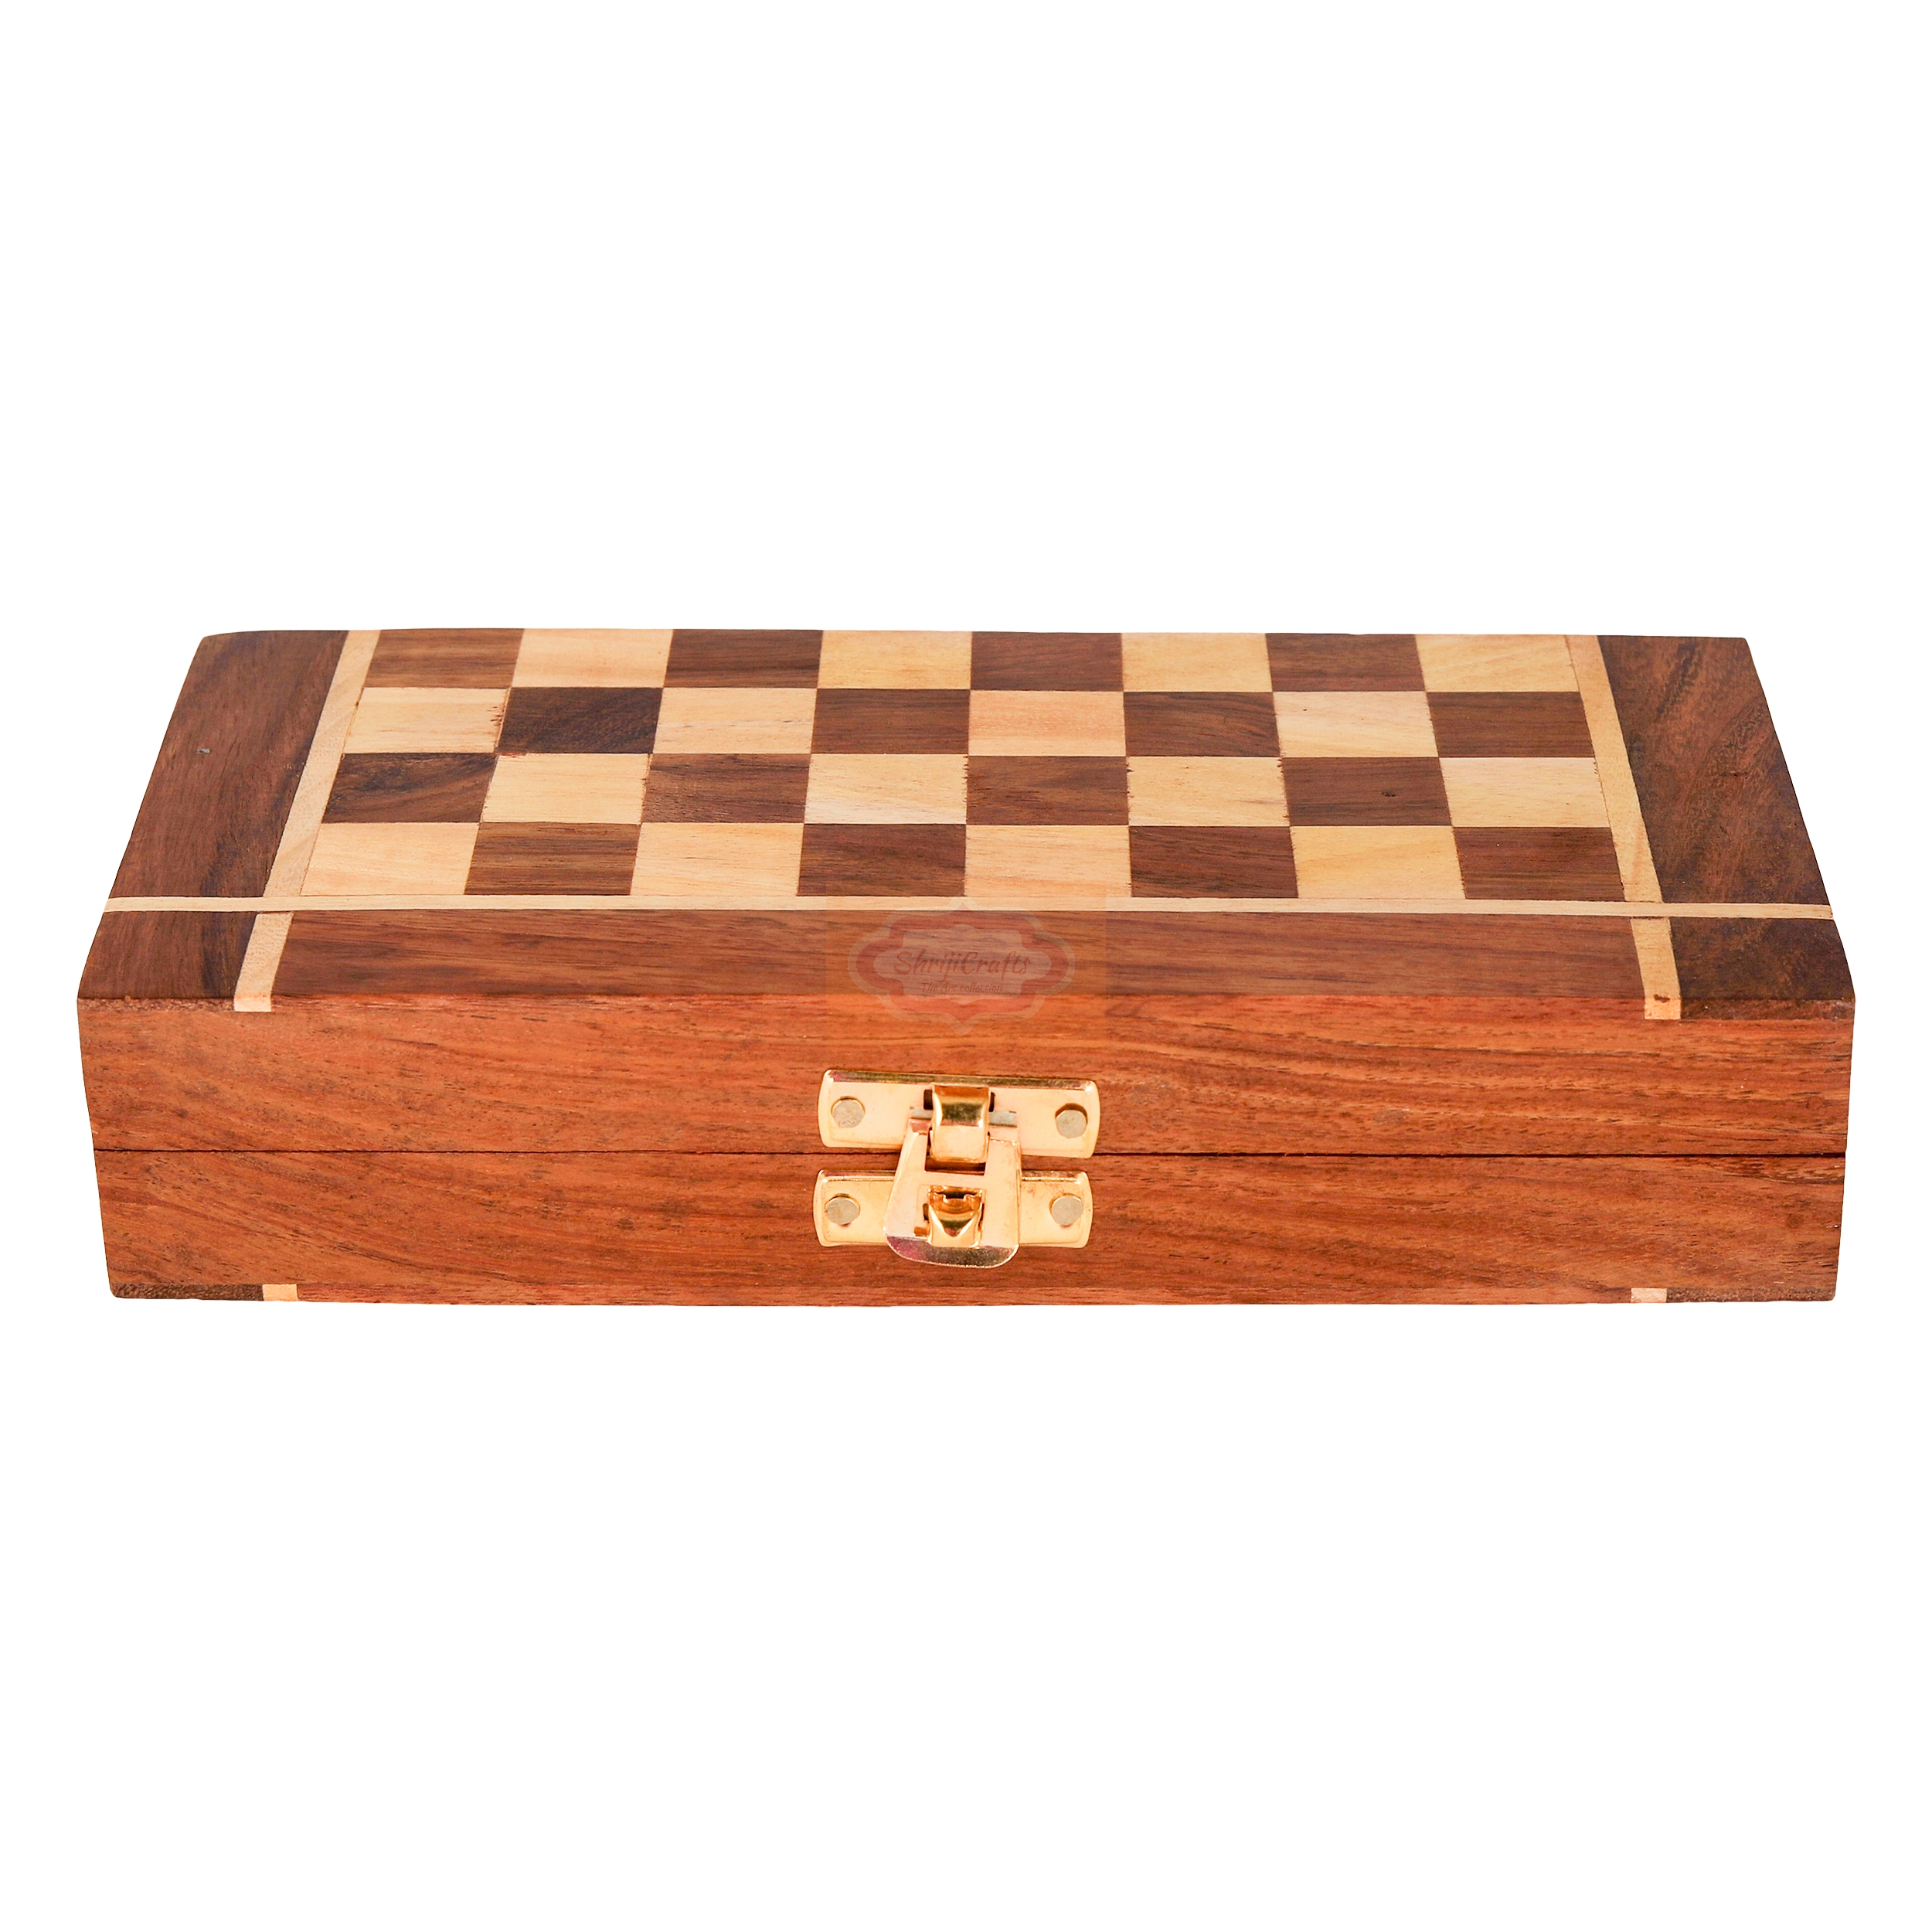 Shrijicrafts | ShrijiCrafts Wooden Handcrafted Non-Magnetic Foldable Chess Board Set Game with Handmade Small Chess Pieces